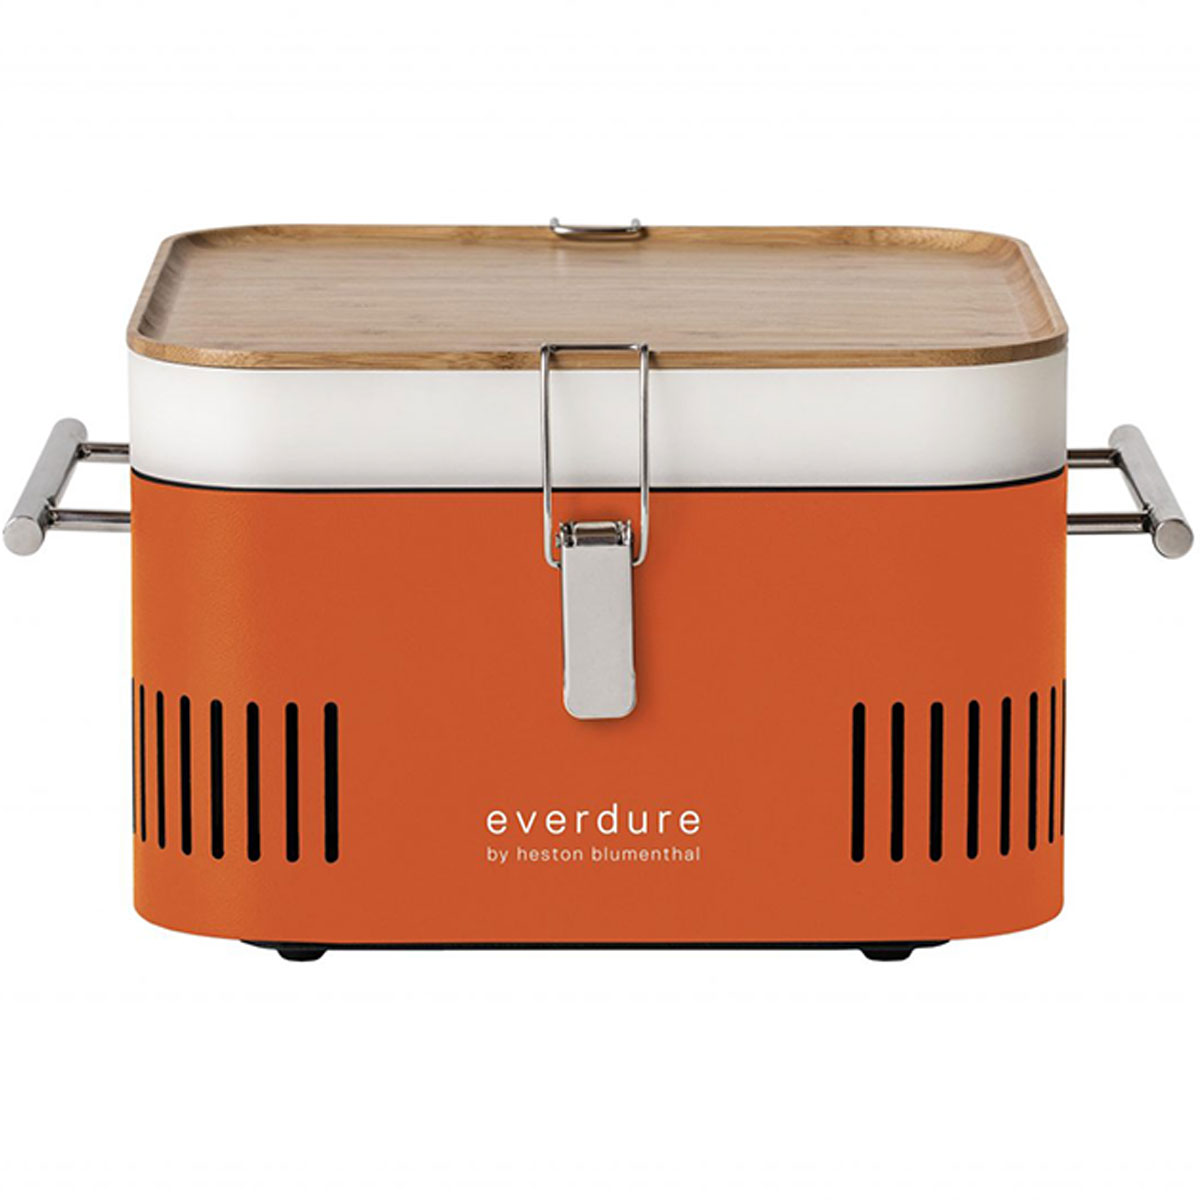 Everdure CUBE Charcoal Grill with Cool Touch Handles, Storage Container & Bamboo Serving Board - image 1 of 18